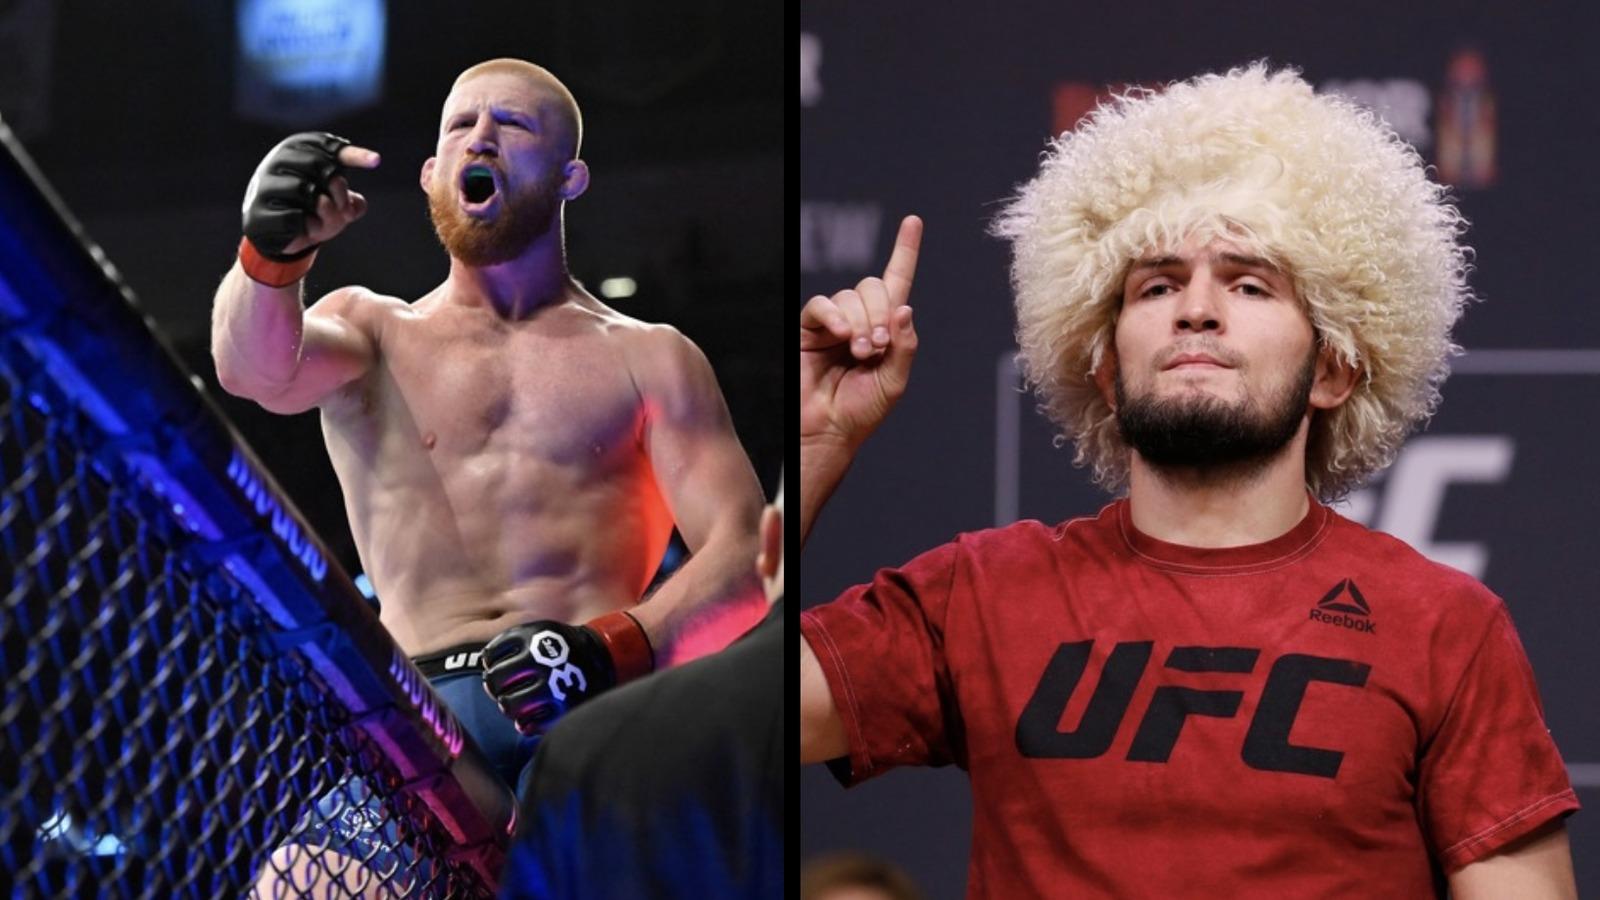 Michael Bisping claims Bo Nickal is on the fast track to become an American Khabib Nurmagomedov